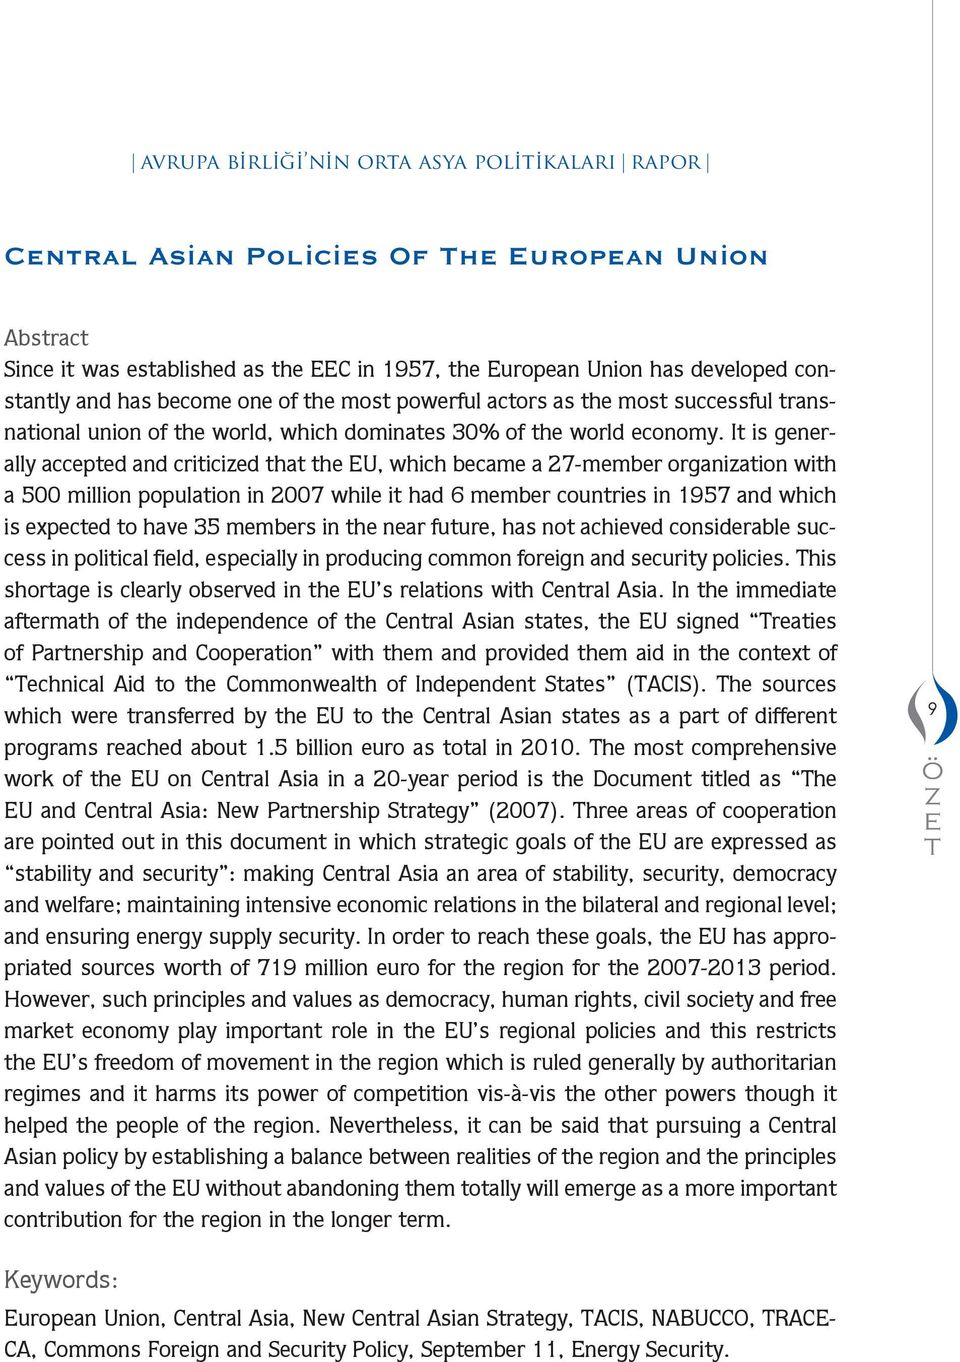 It is generally accepted and criticized that the EU, which ecae a 27-eer organization with a 500 illion population in 2007 while it had 6 eer countries in 1957 and which is expected to have 35 eers